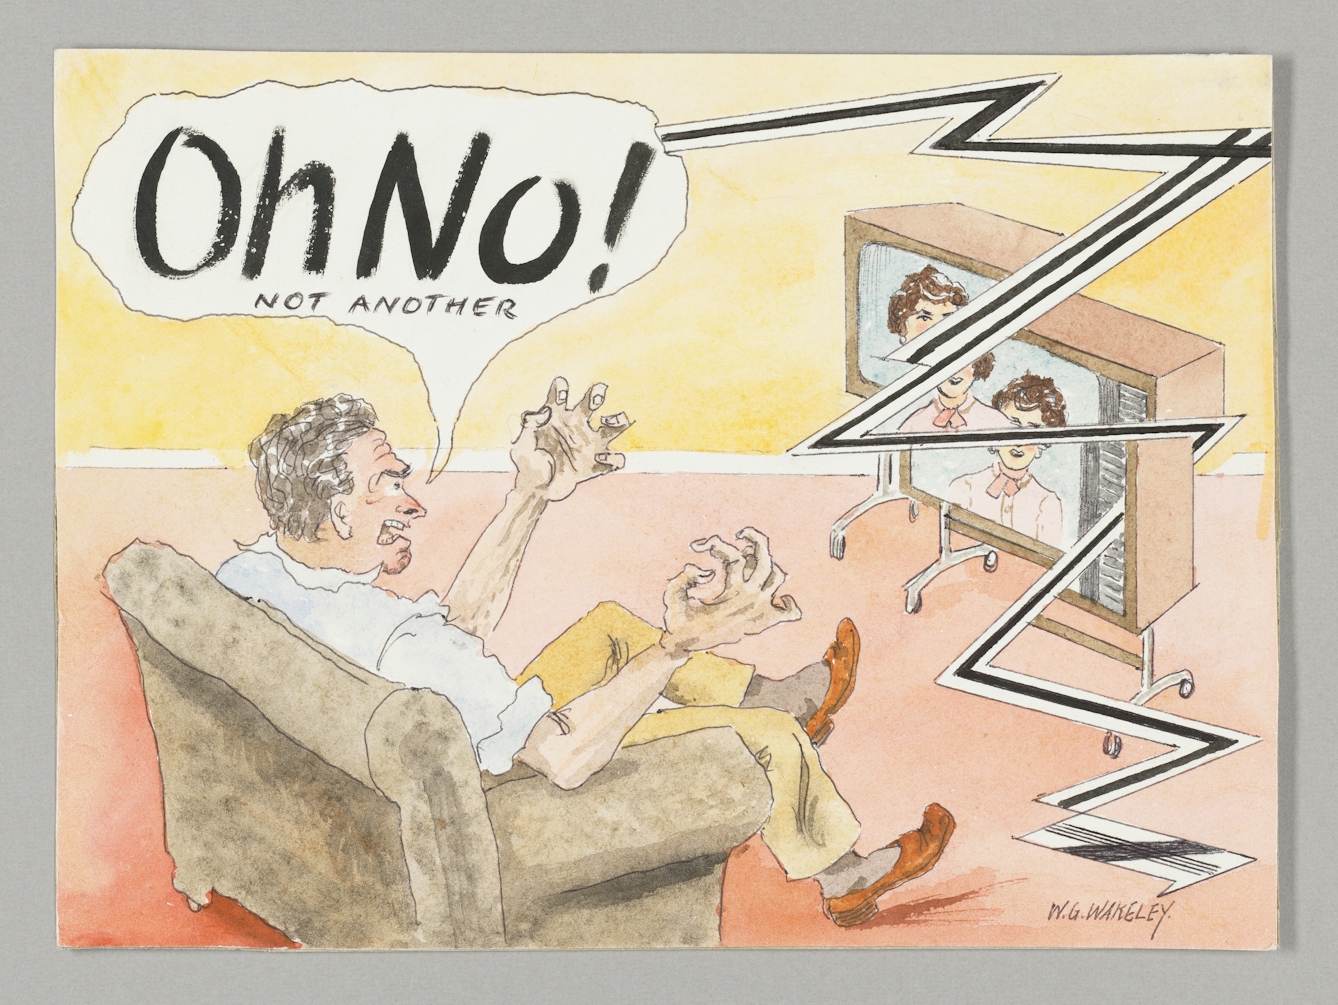 Painting of a man sat in an armchair looking at a television. He looks angry, his hands clawed, his legs animated as he shouts "Oh NO! Not another". The television had been cut into four pieces by a spikey zigzag line taking up the right third of the image.